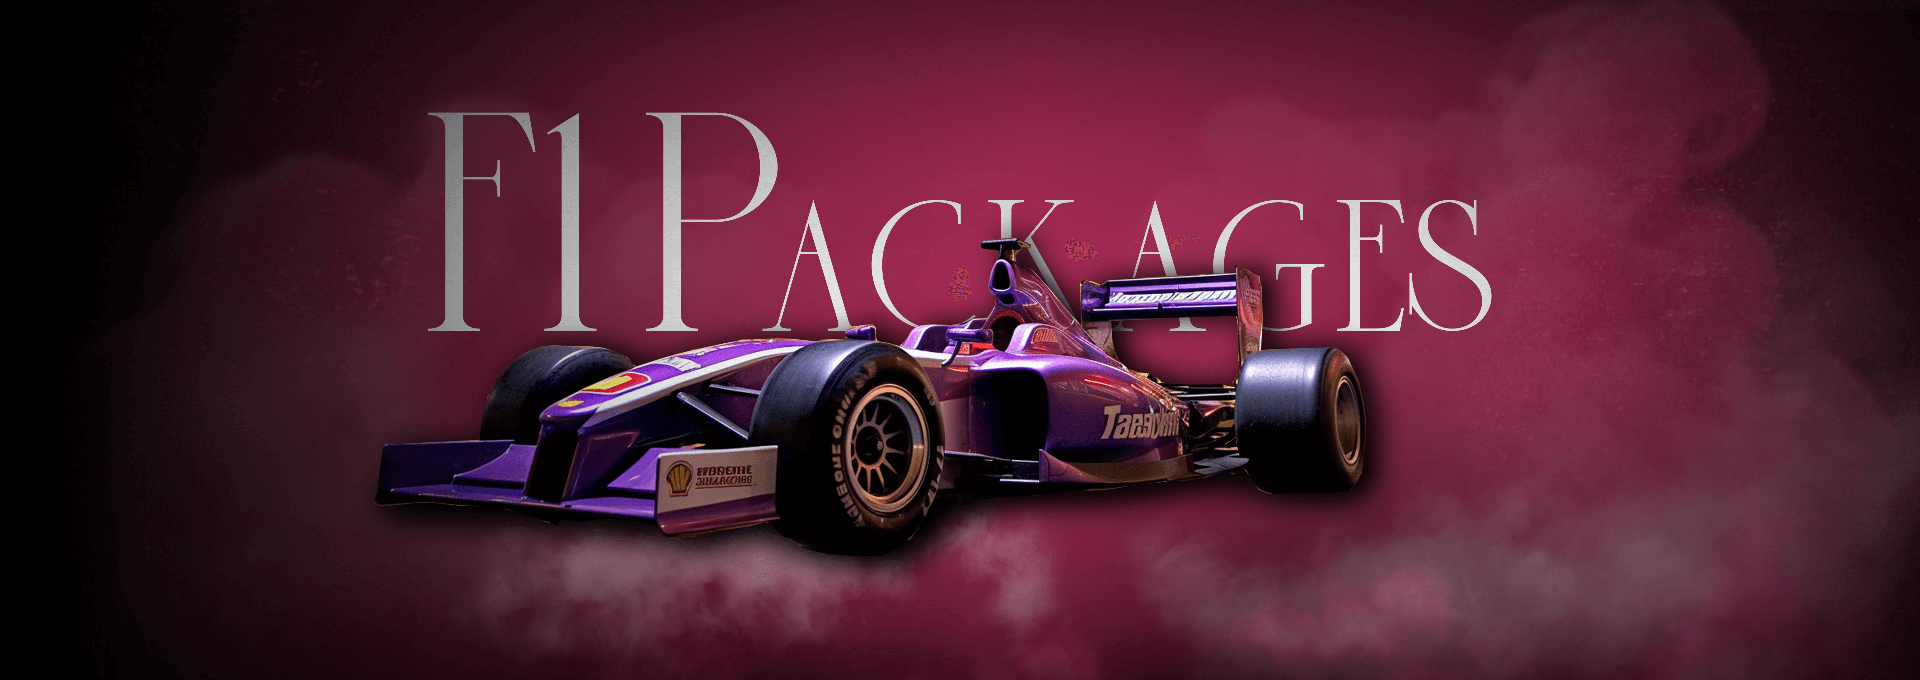 F1 packages header